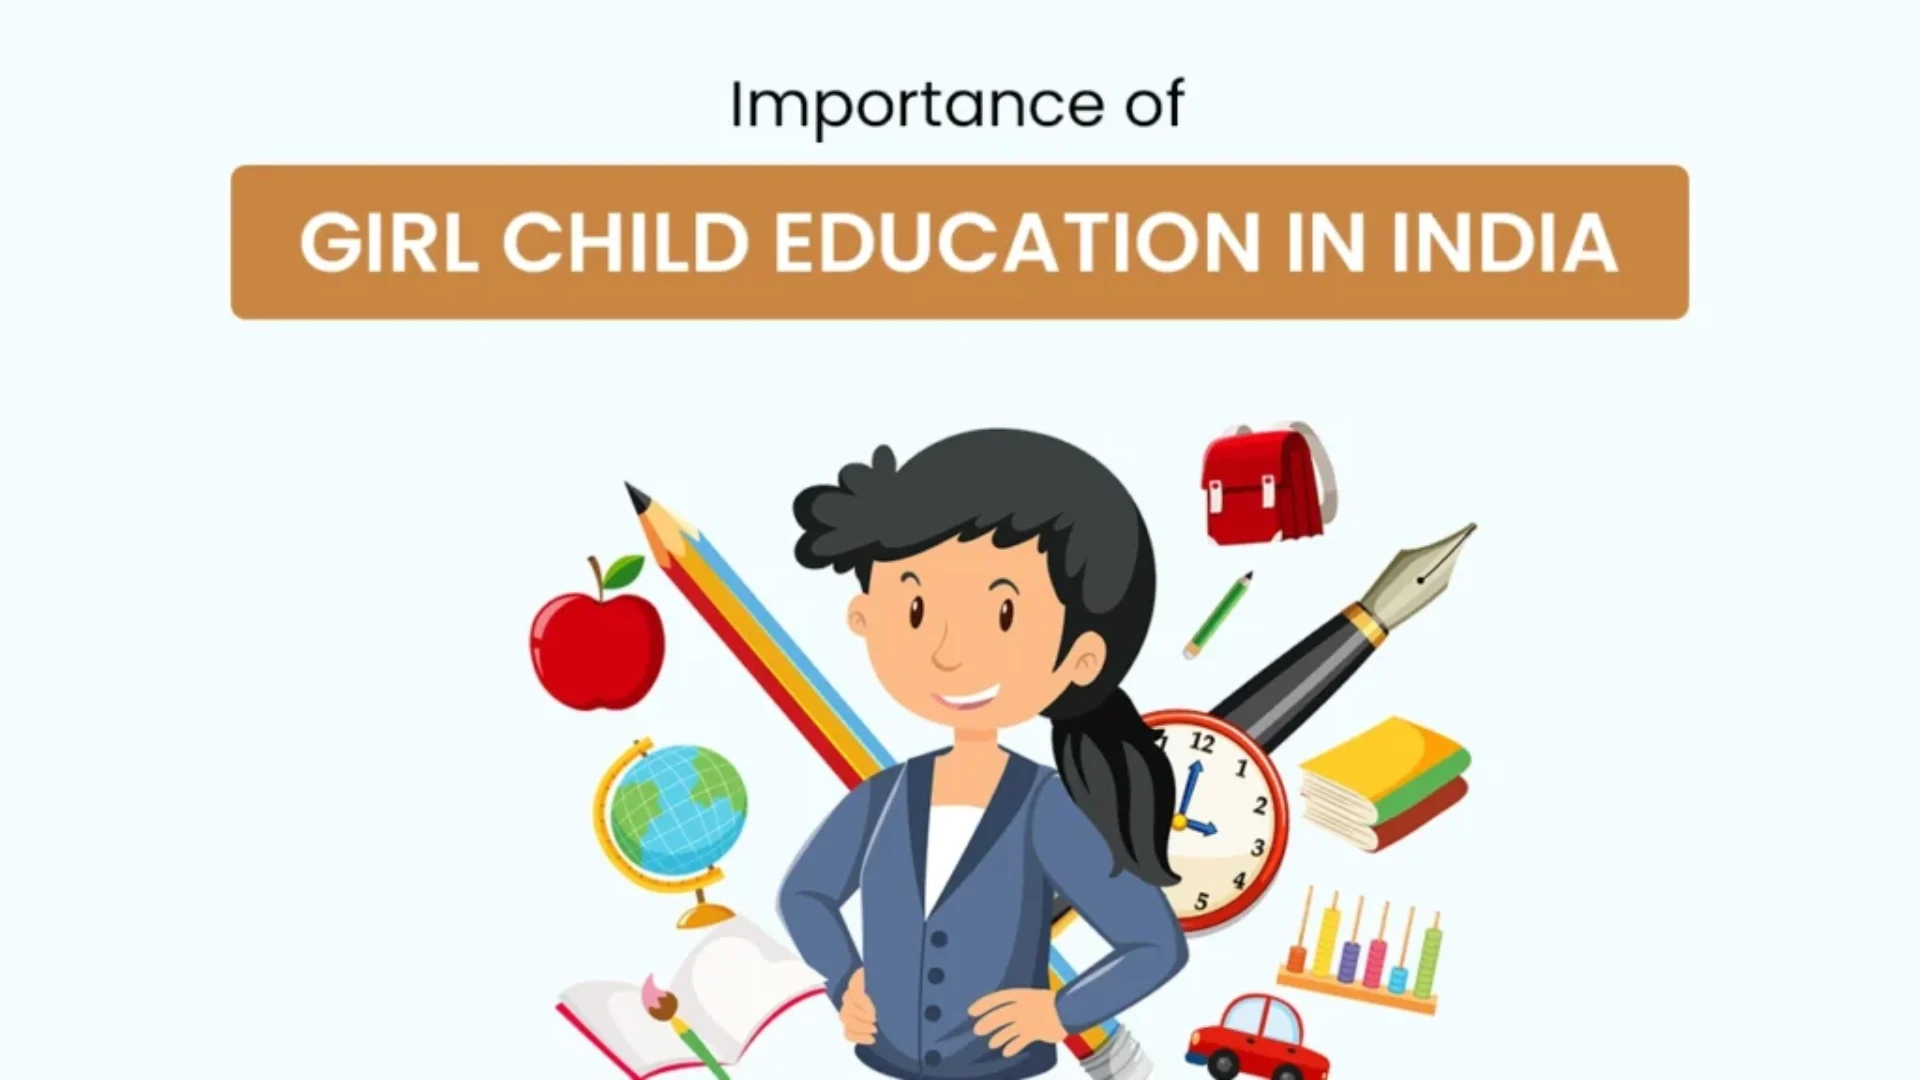 Importance of Girl Child Education in India